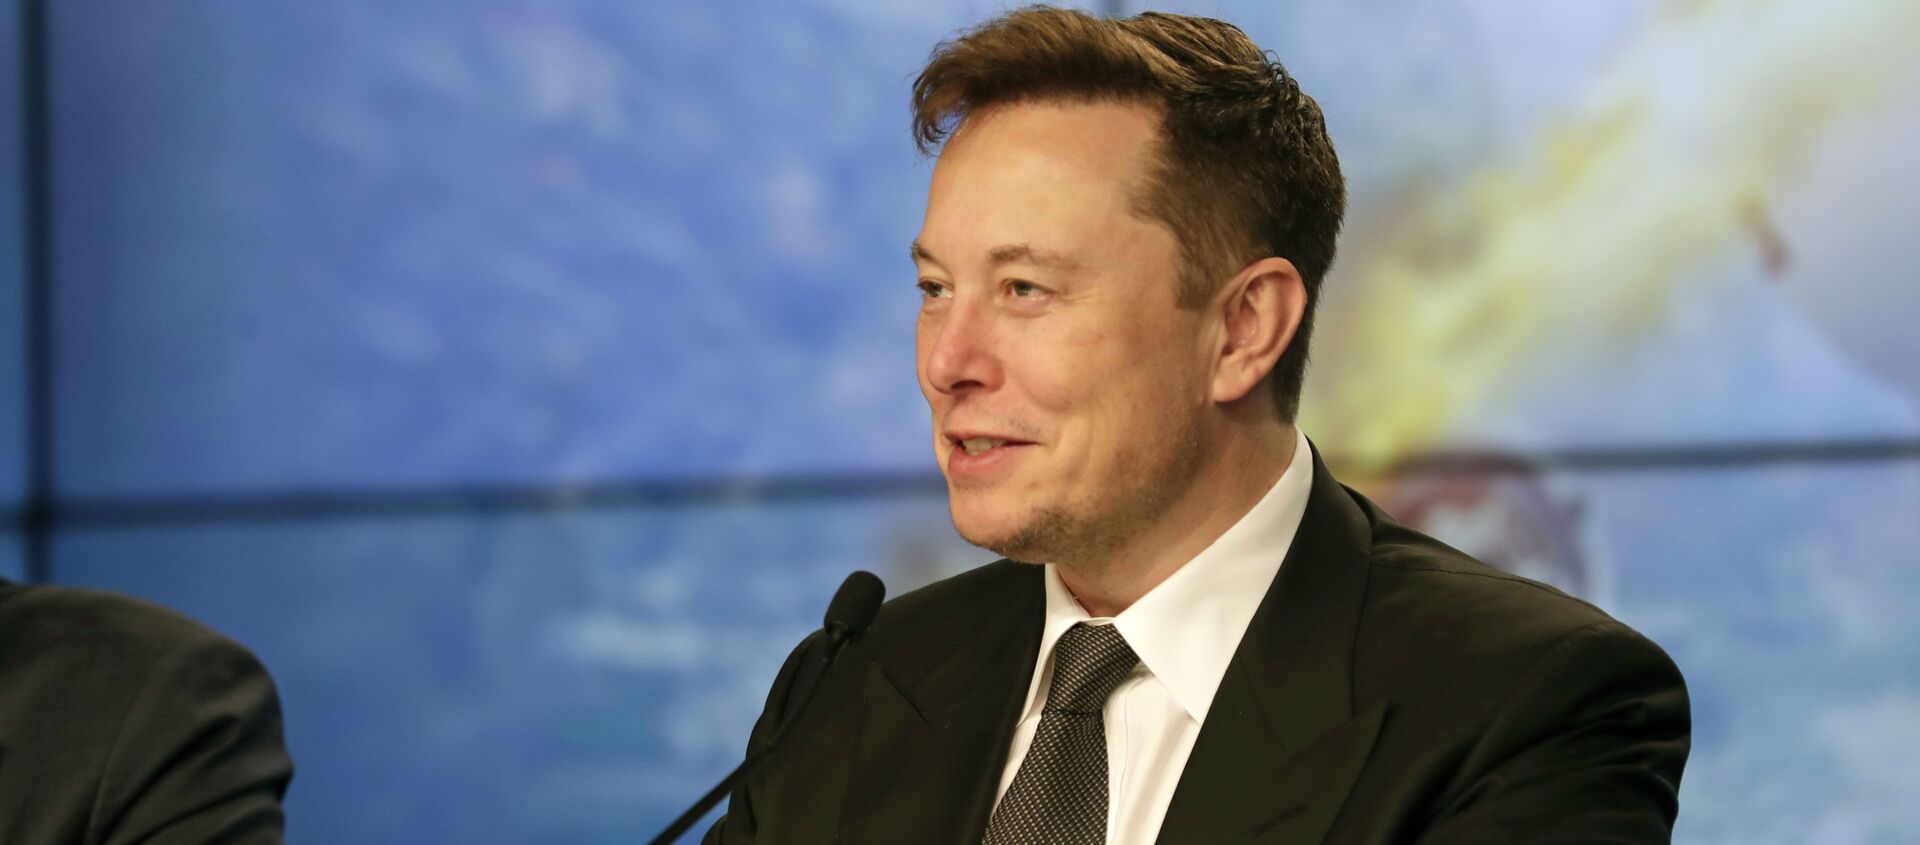 Elon Musk, founder, CEO, and chief engineer/designer of SpaceX speaks during a news conference after a Falcon 9 SpaceX rocket test flight to demonstrate the capsule's emergency escape system at the Kennedy Space Center in Cape Canaveral, Fla., Sunday, Jan. 19, 2020 - Sputnik International, 1920, 02.02.2021